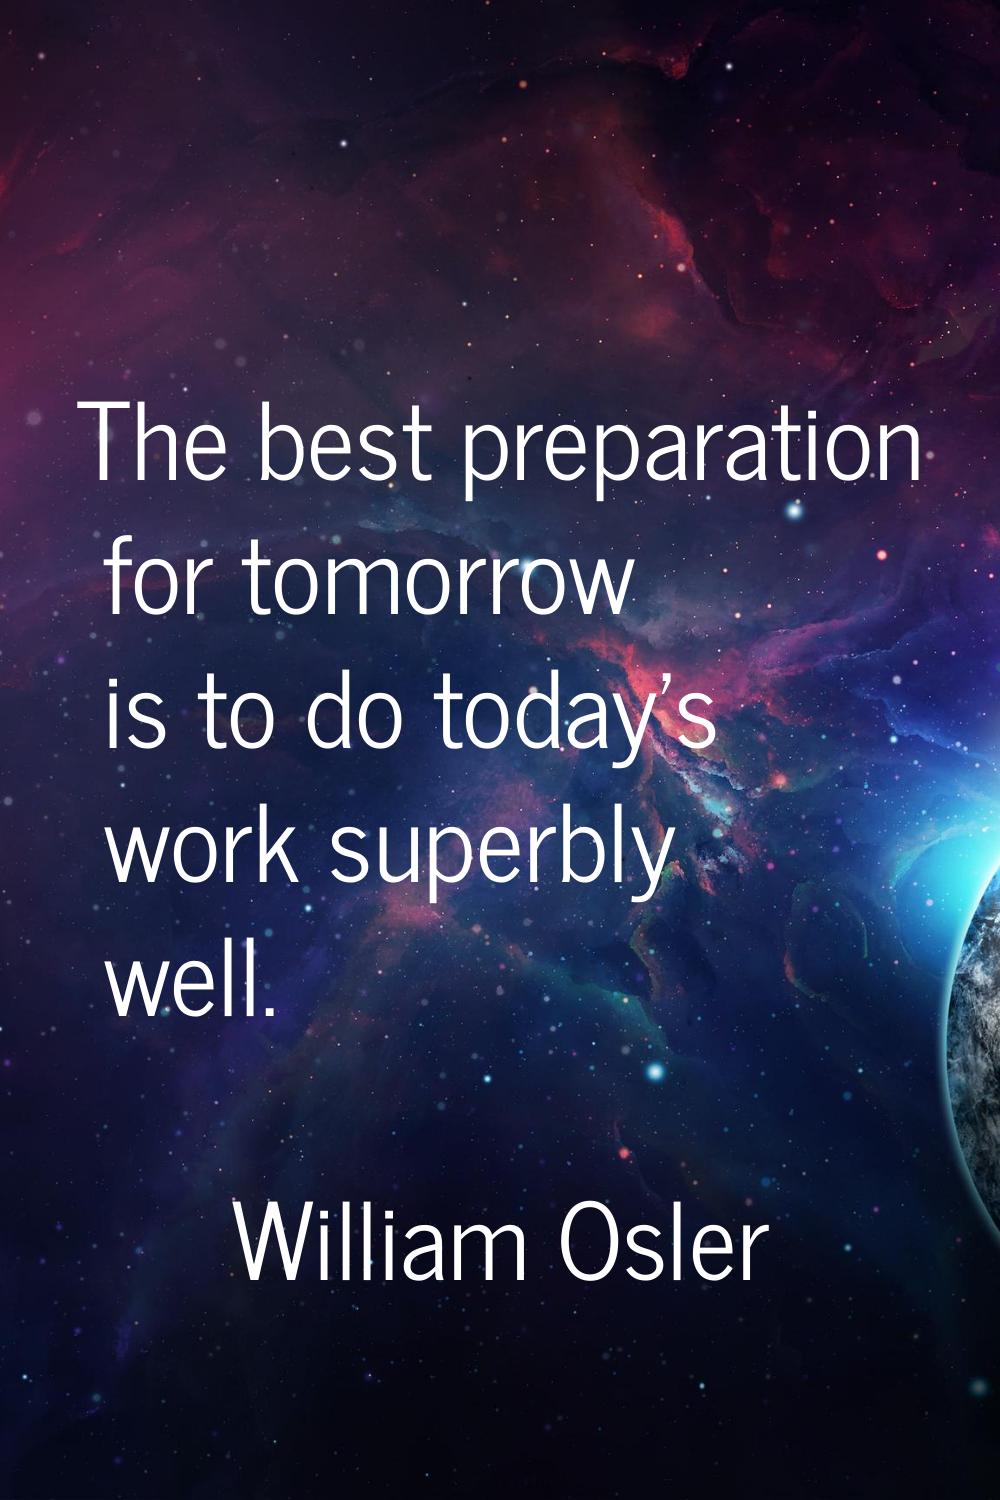 The best preparation for tomorrow is to do today's work superbly well.